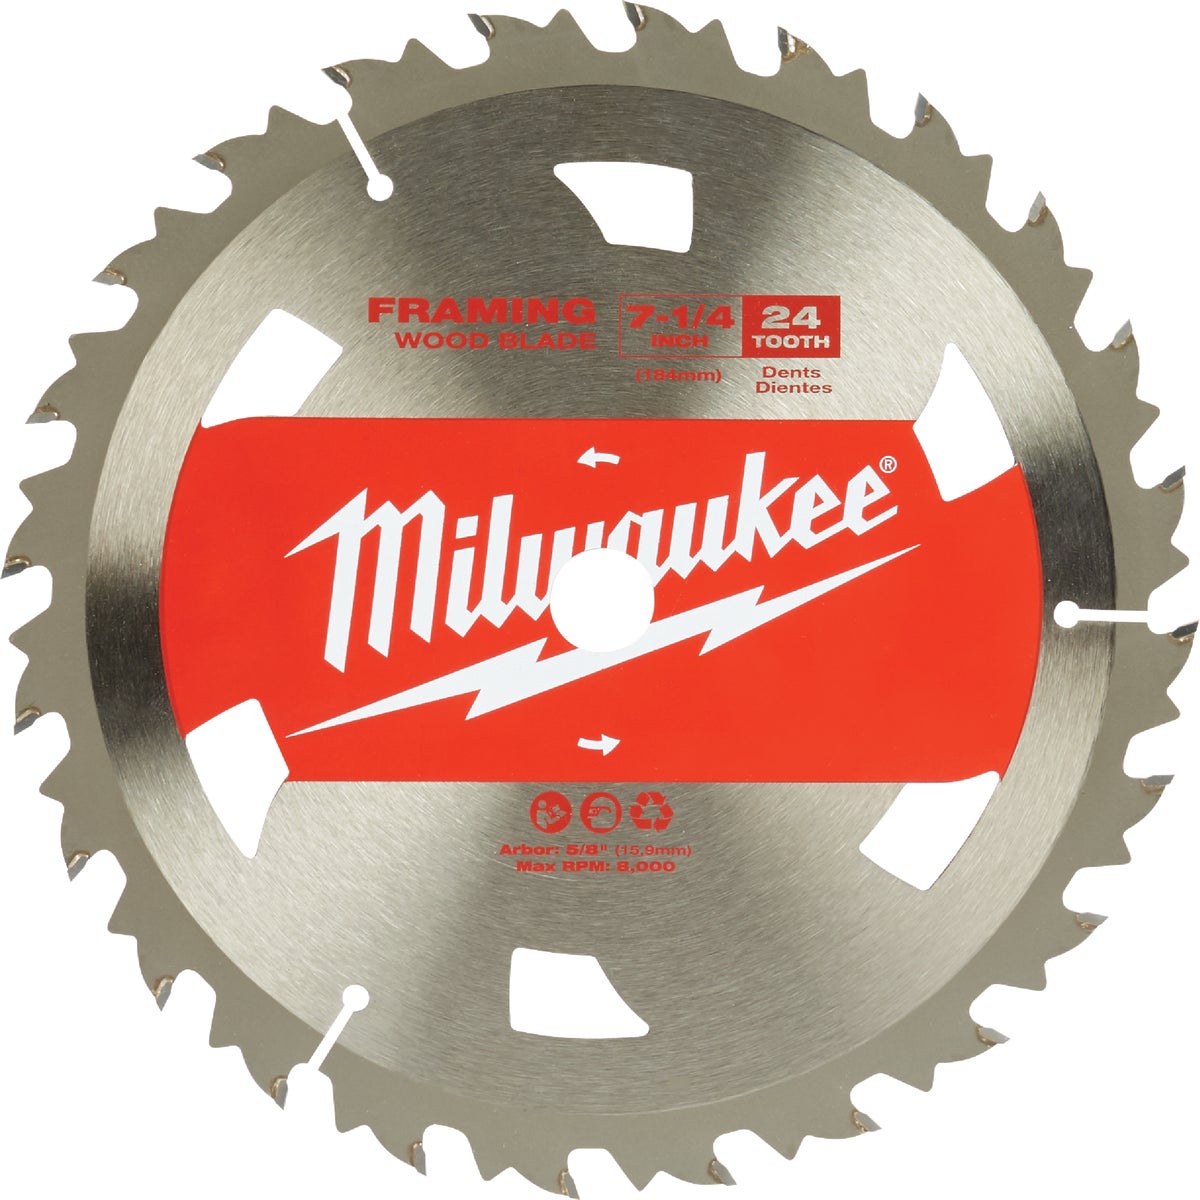 Item 304031, Milwukee circular saw blades provide longer life, increased accuracy and 